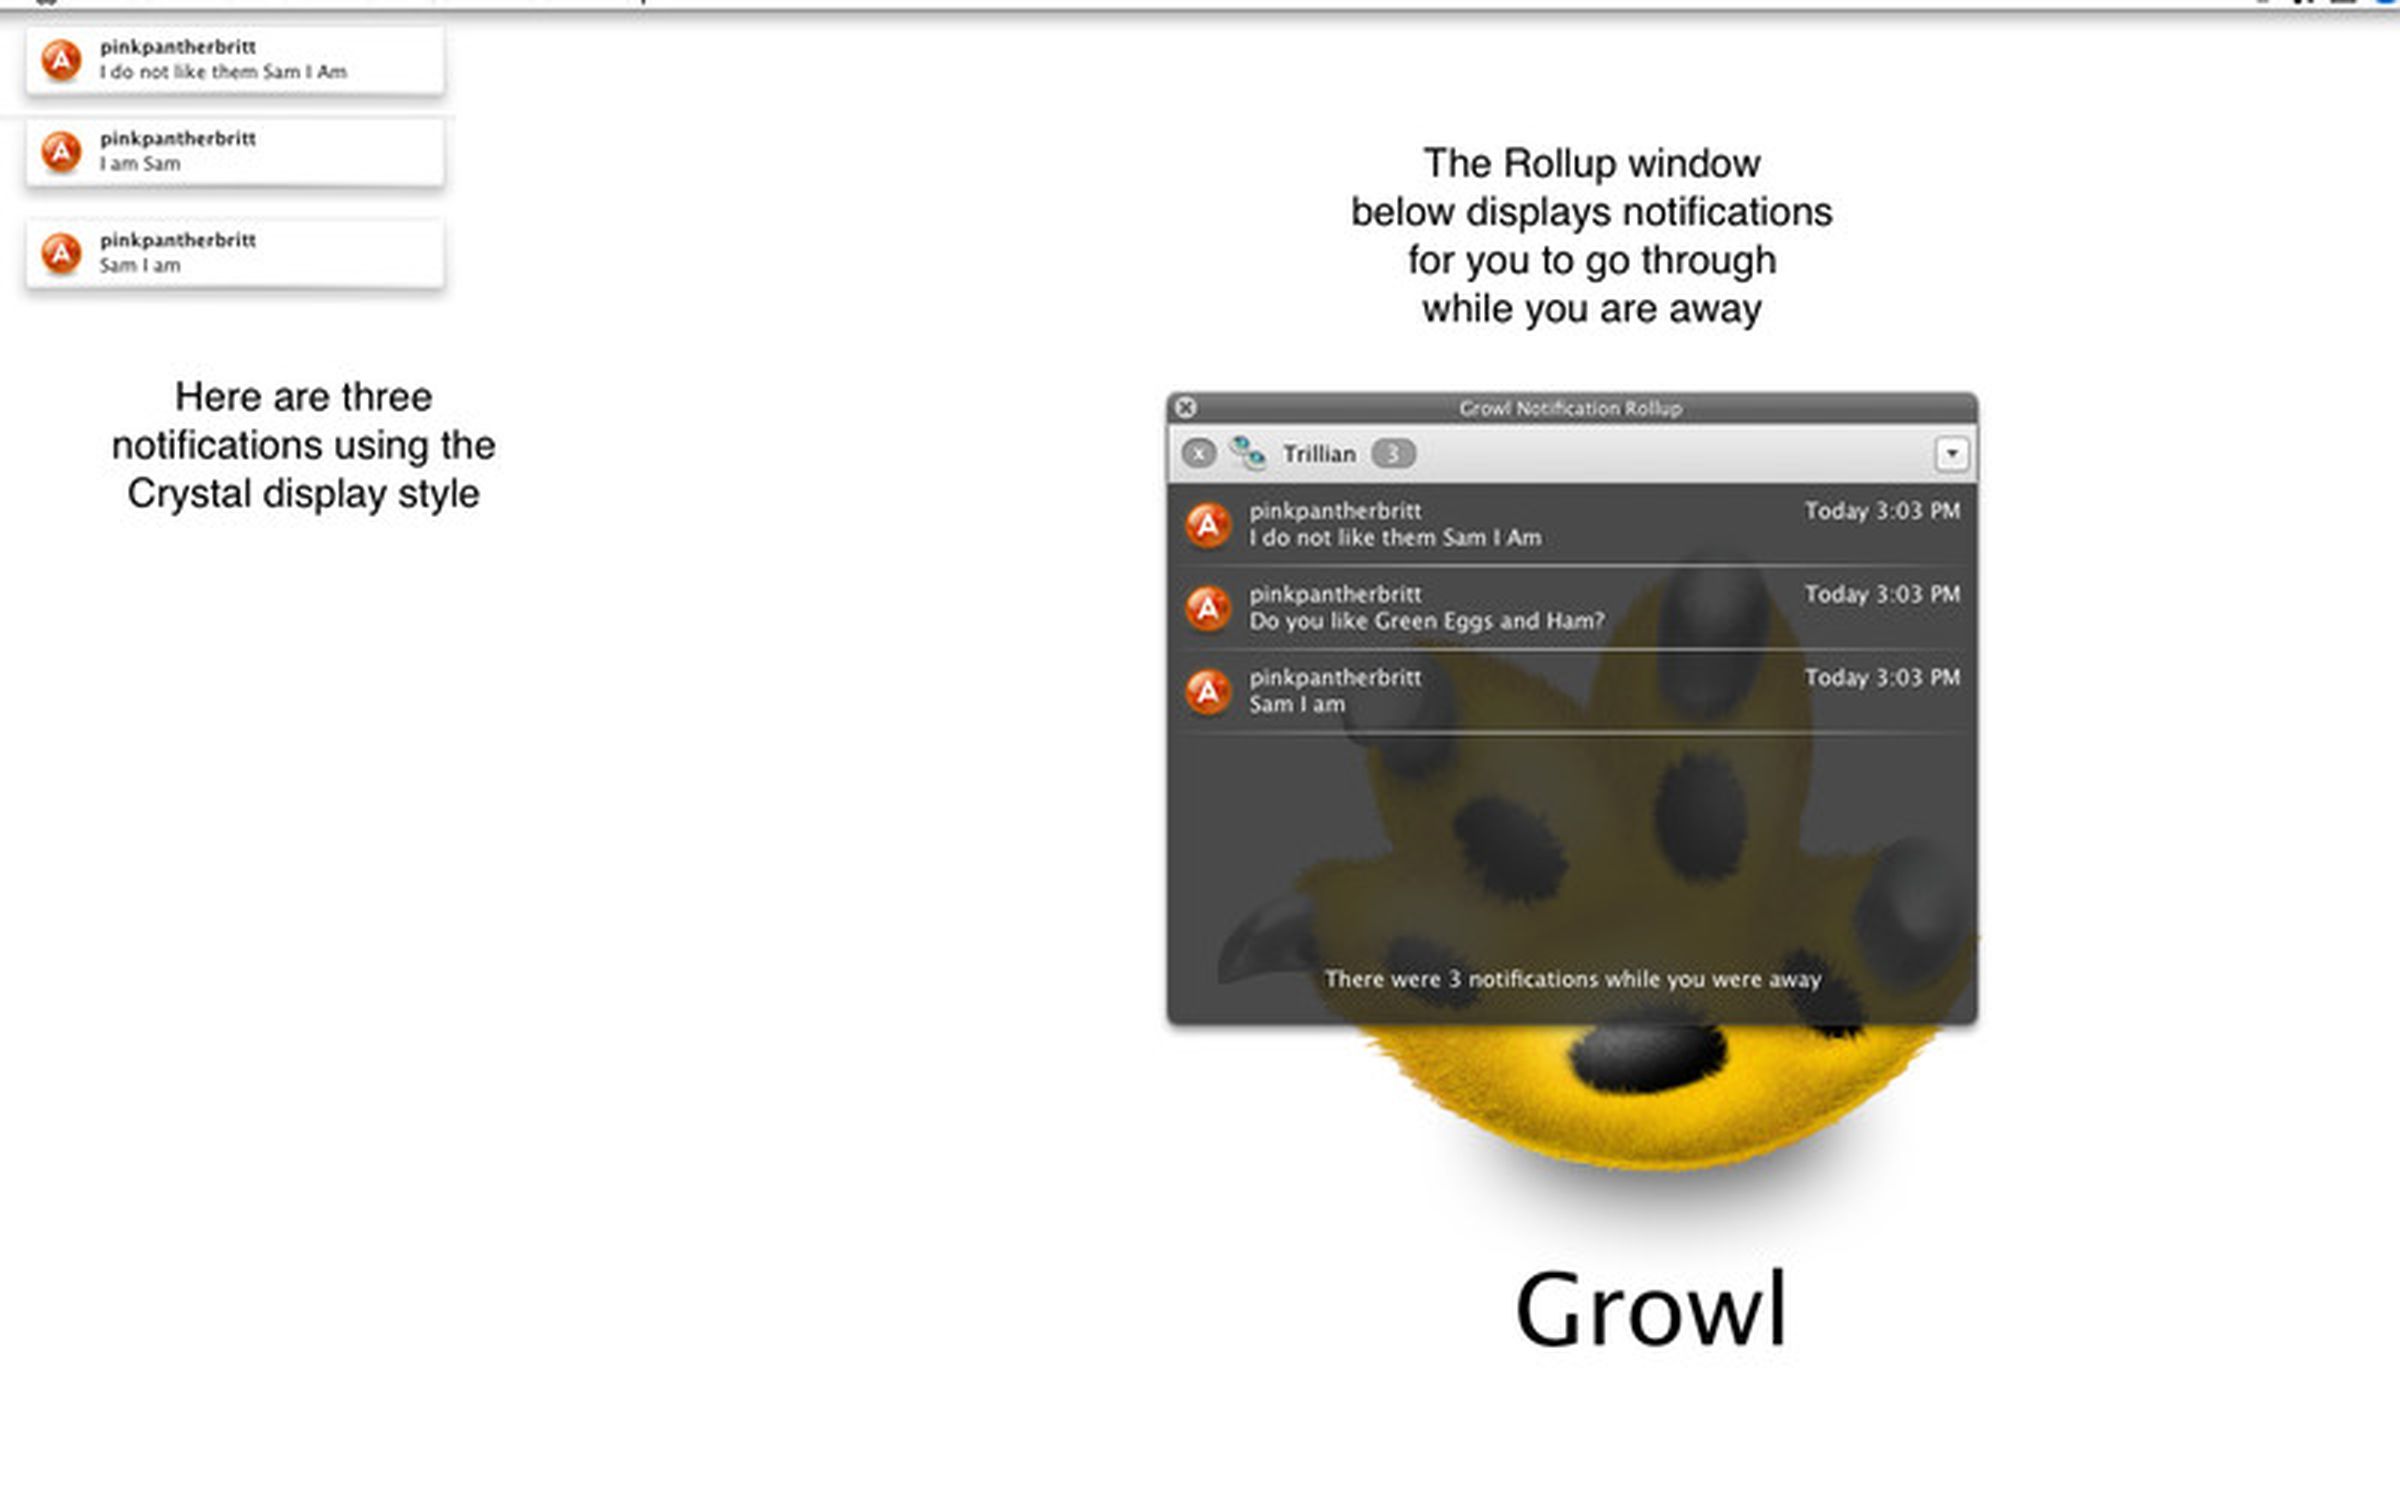 Growl 1.3 for Lion gallery